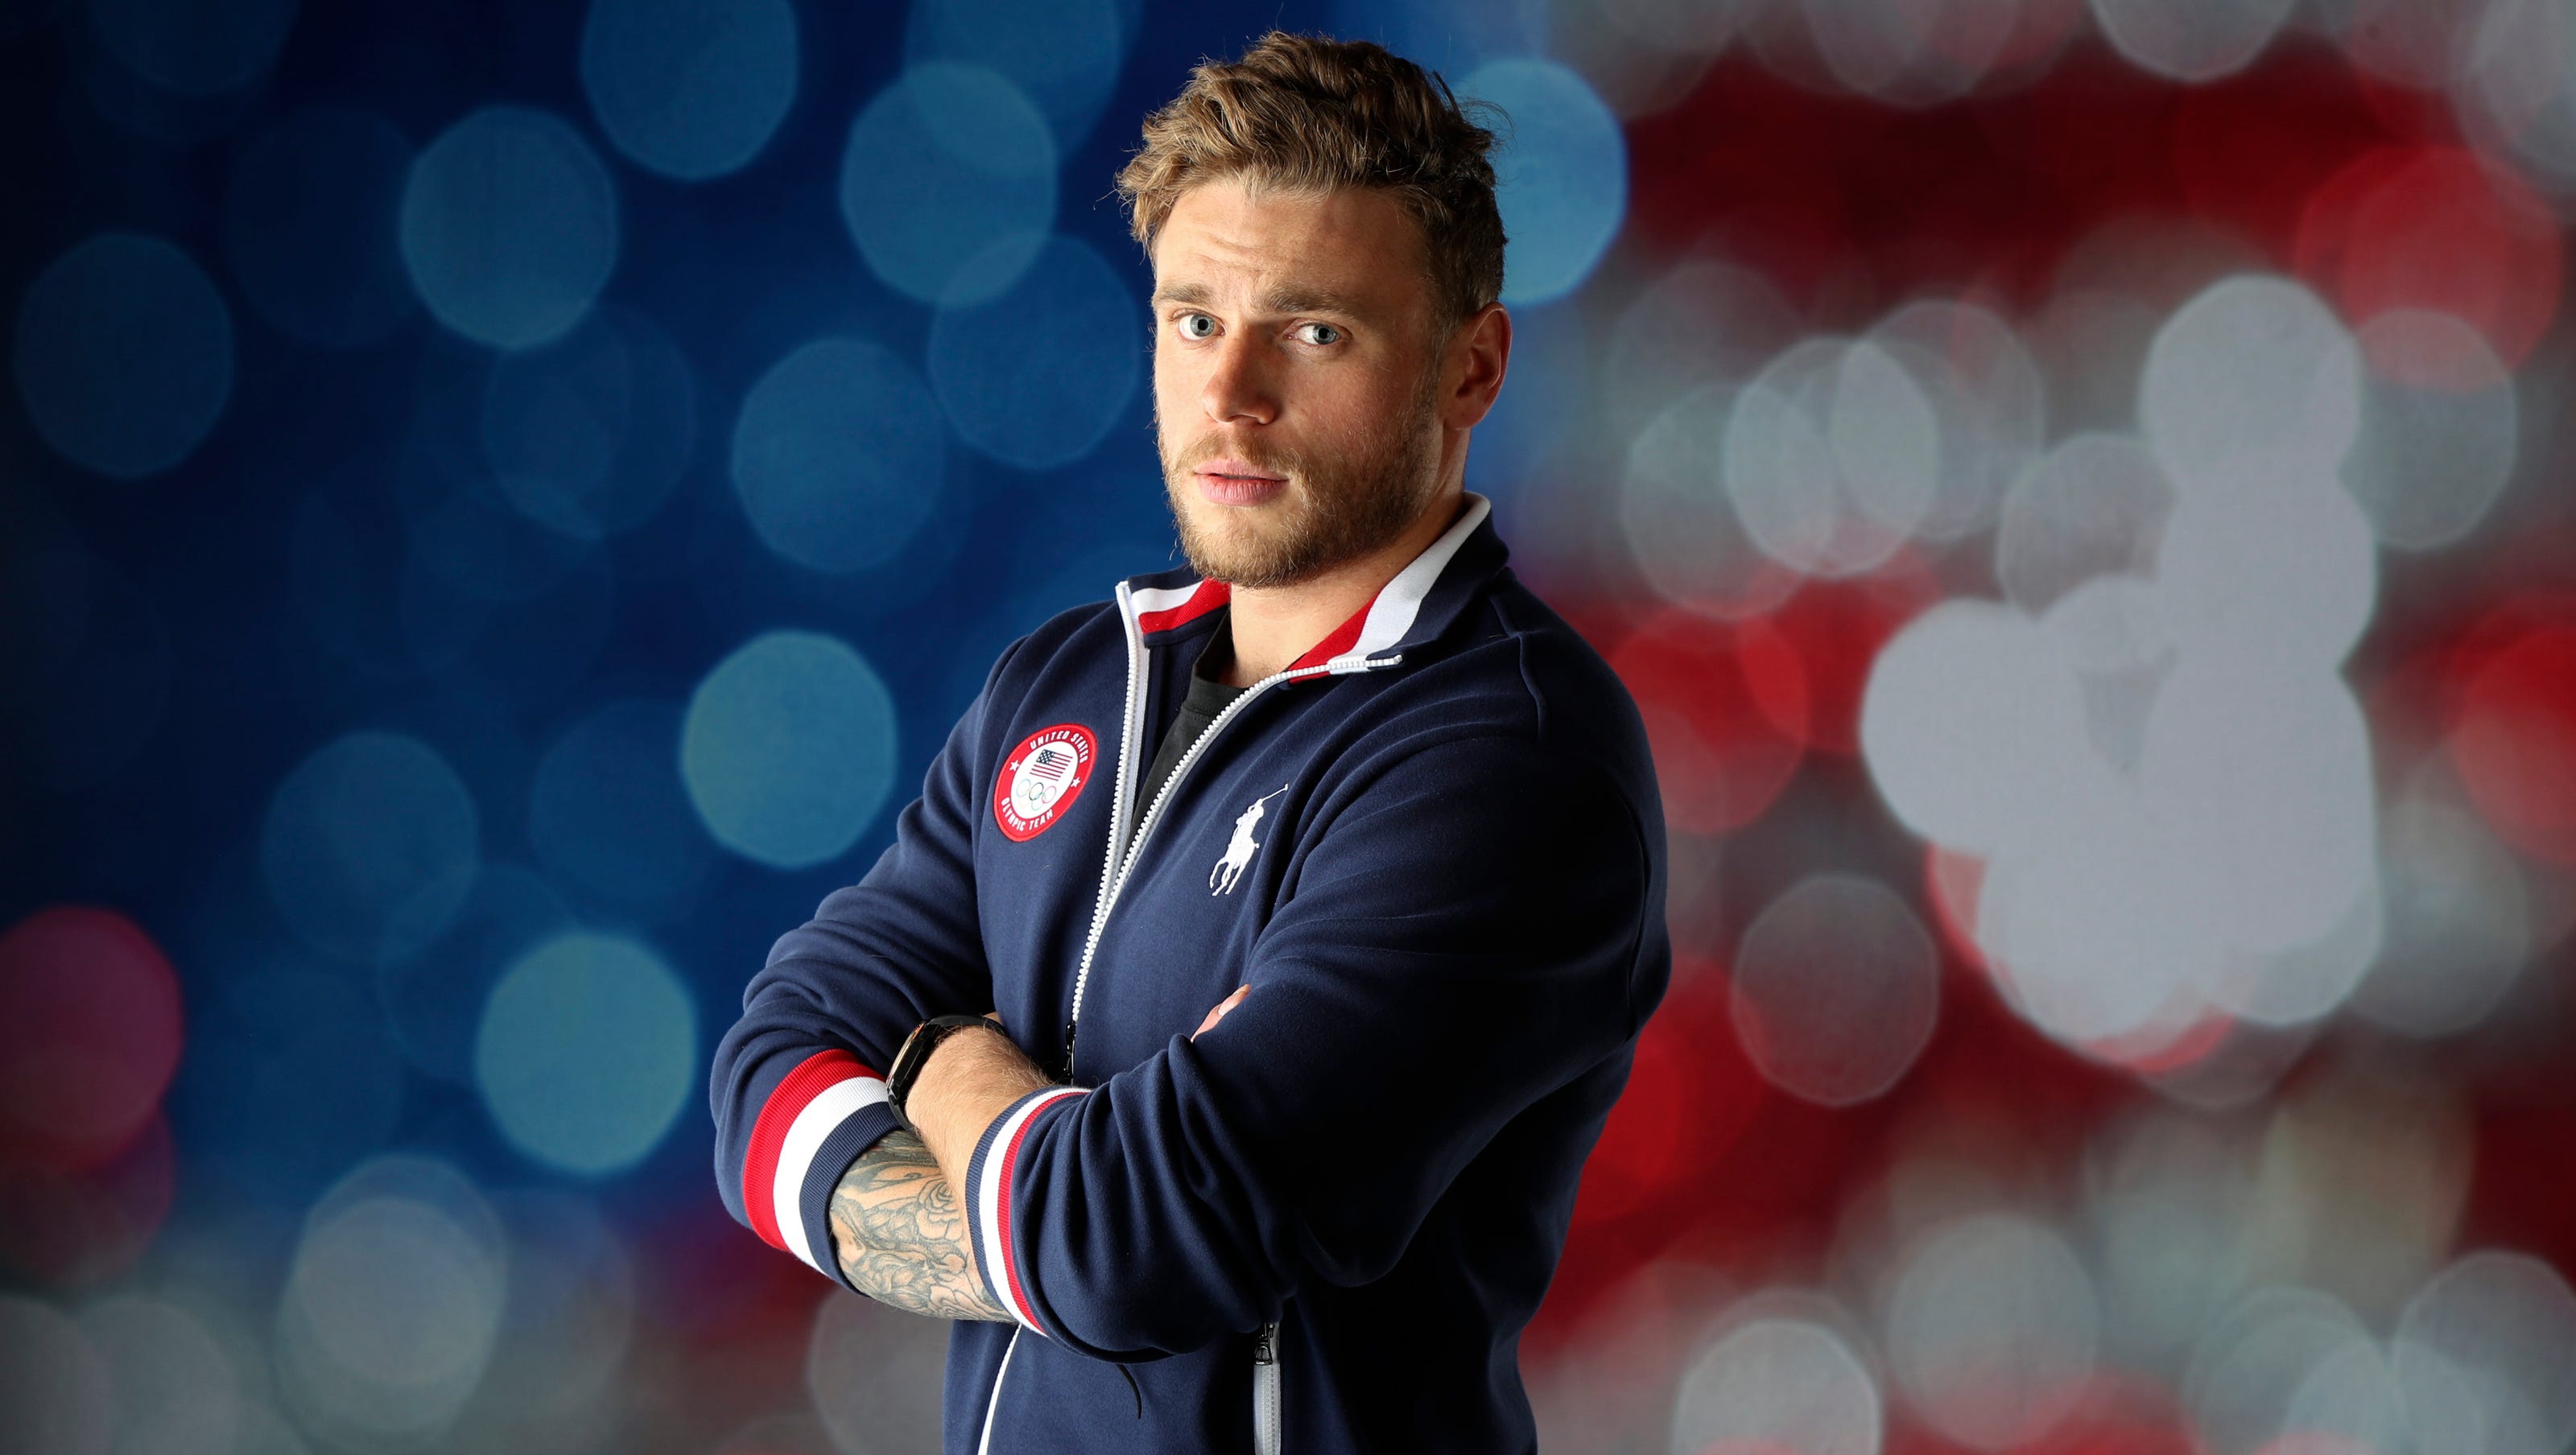 2018 Winter Olympics: Gus Kenworthy takes shot at Mike Pence on Instagram